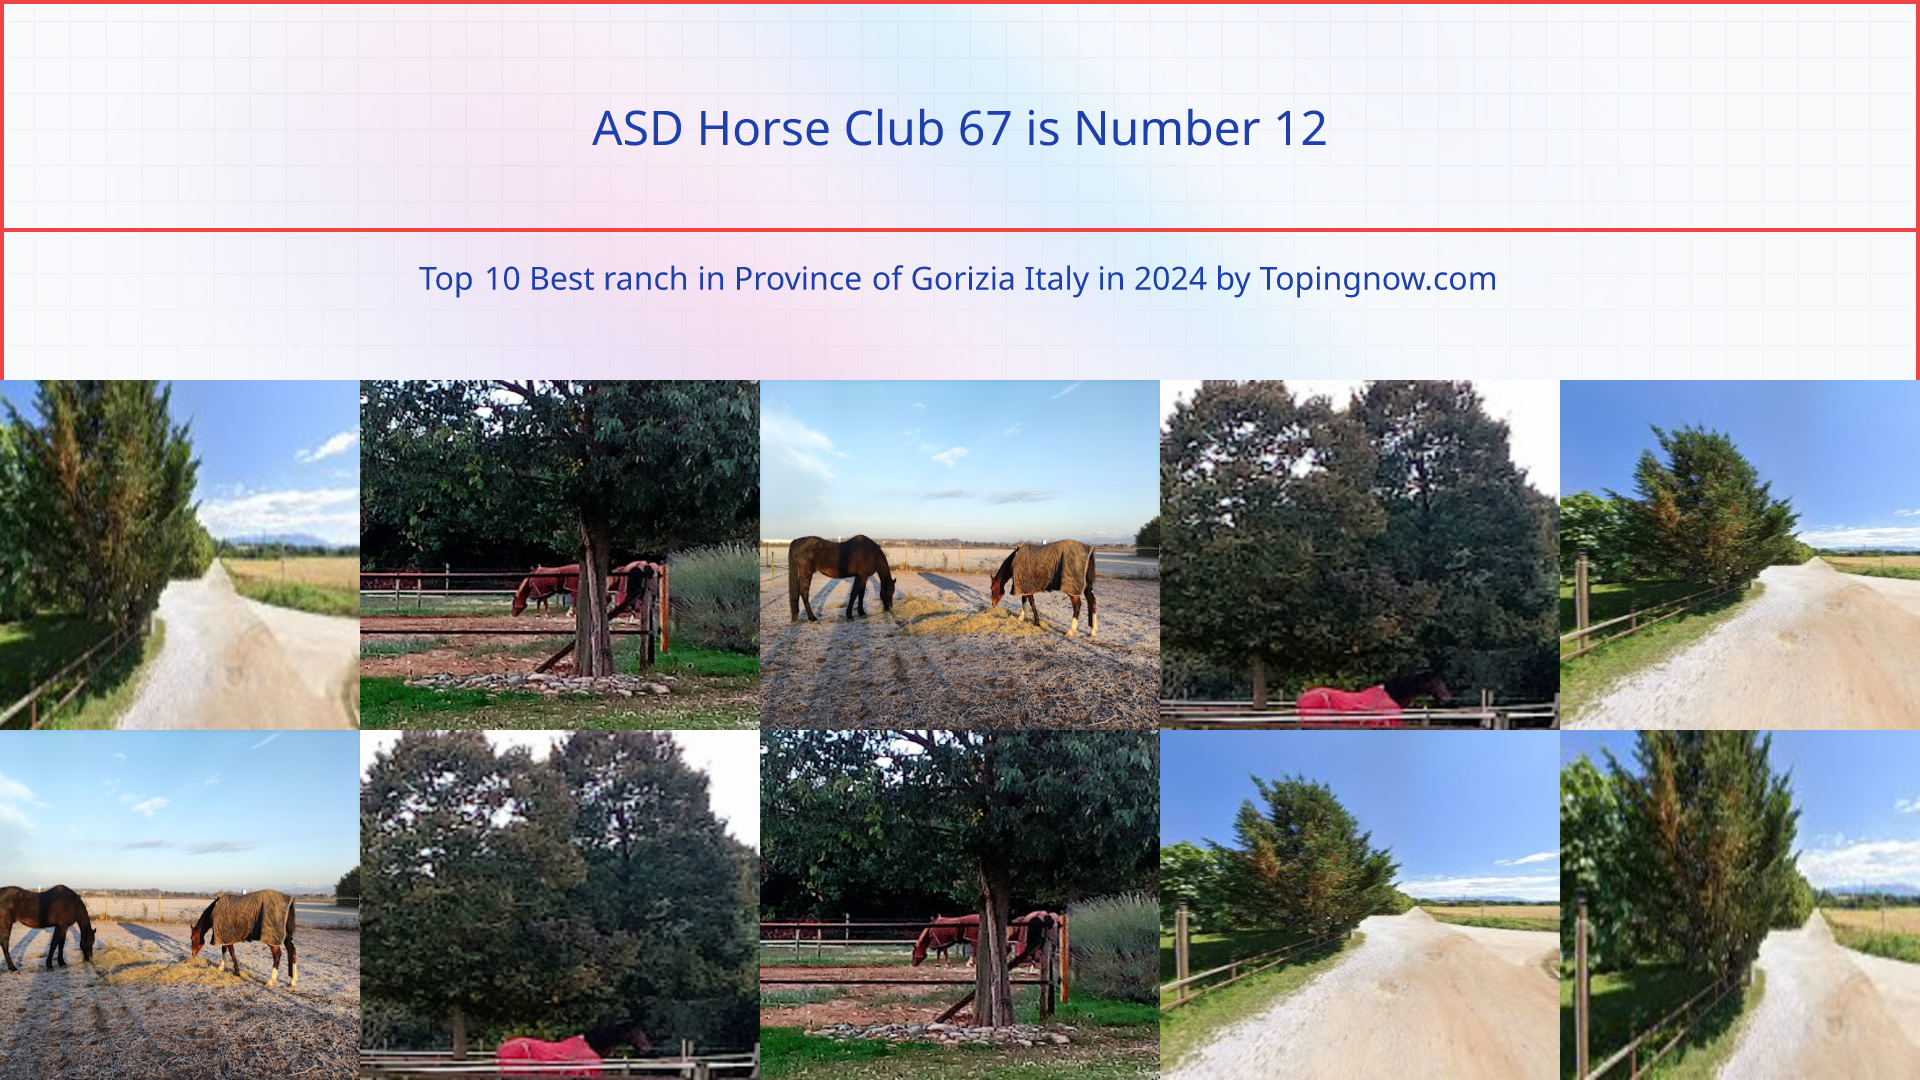 ASD Horse Club 67: Top 10 Best ranch in Province of Gorizia Italy in 2024